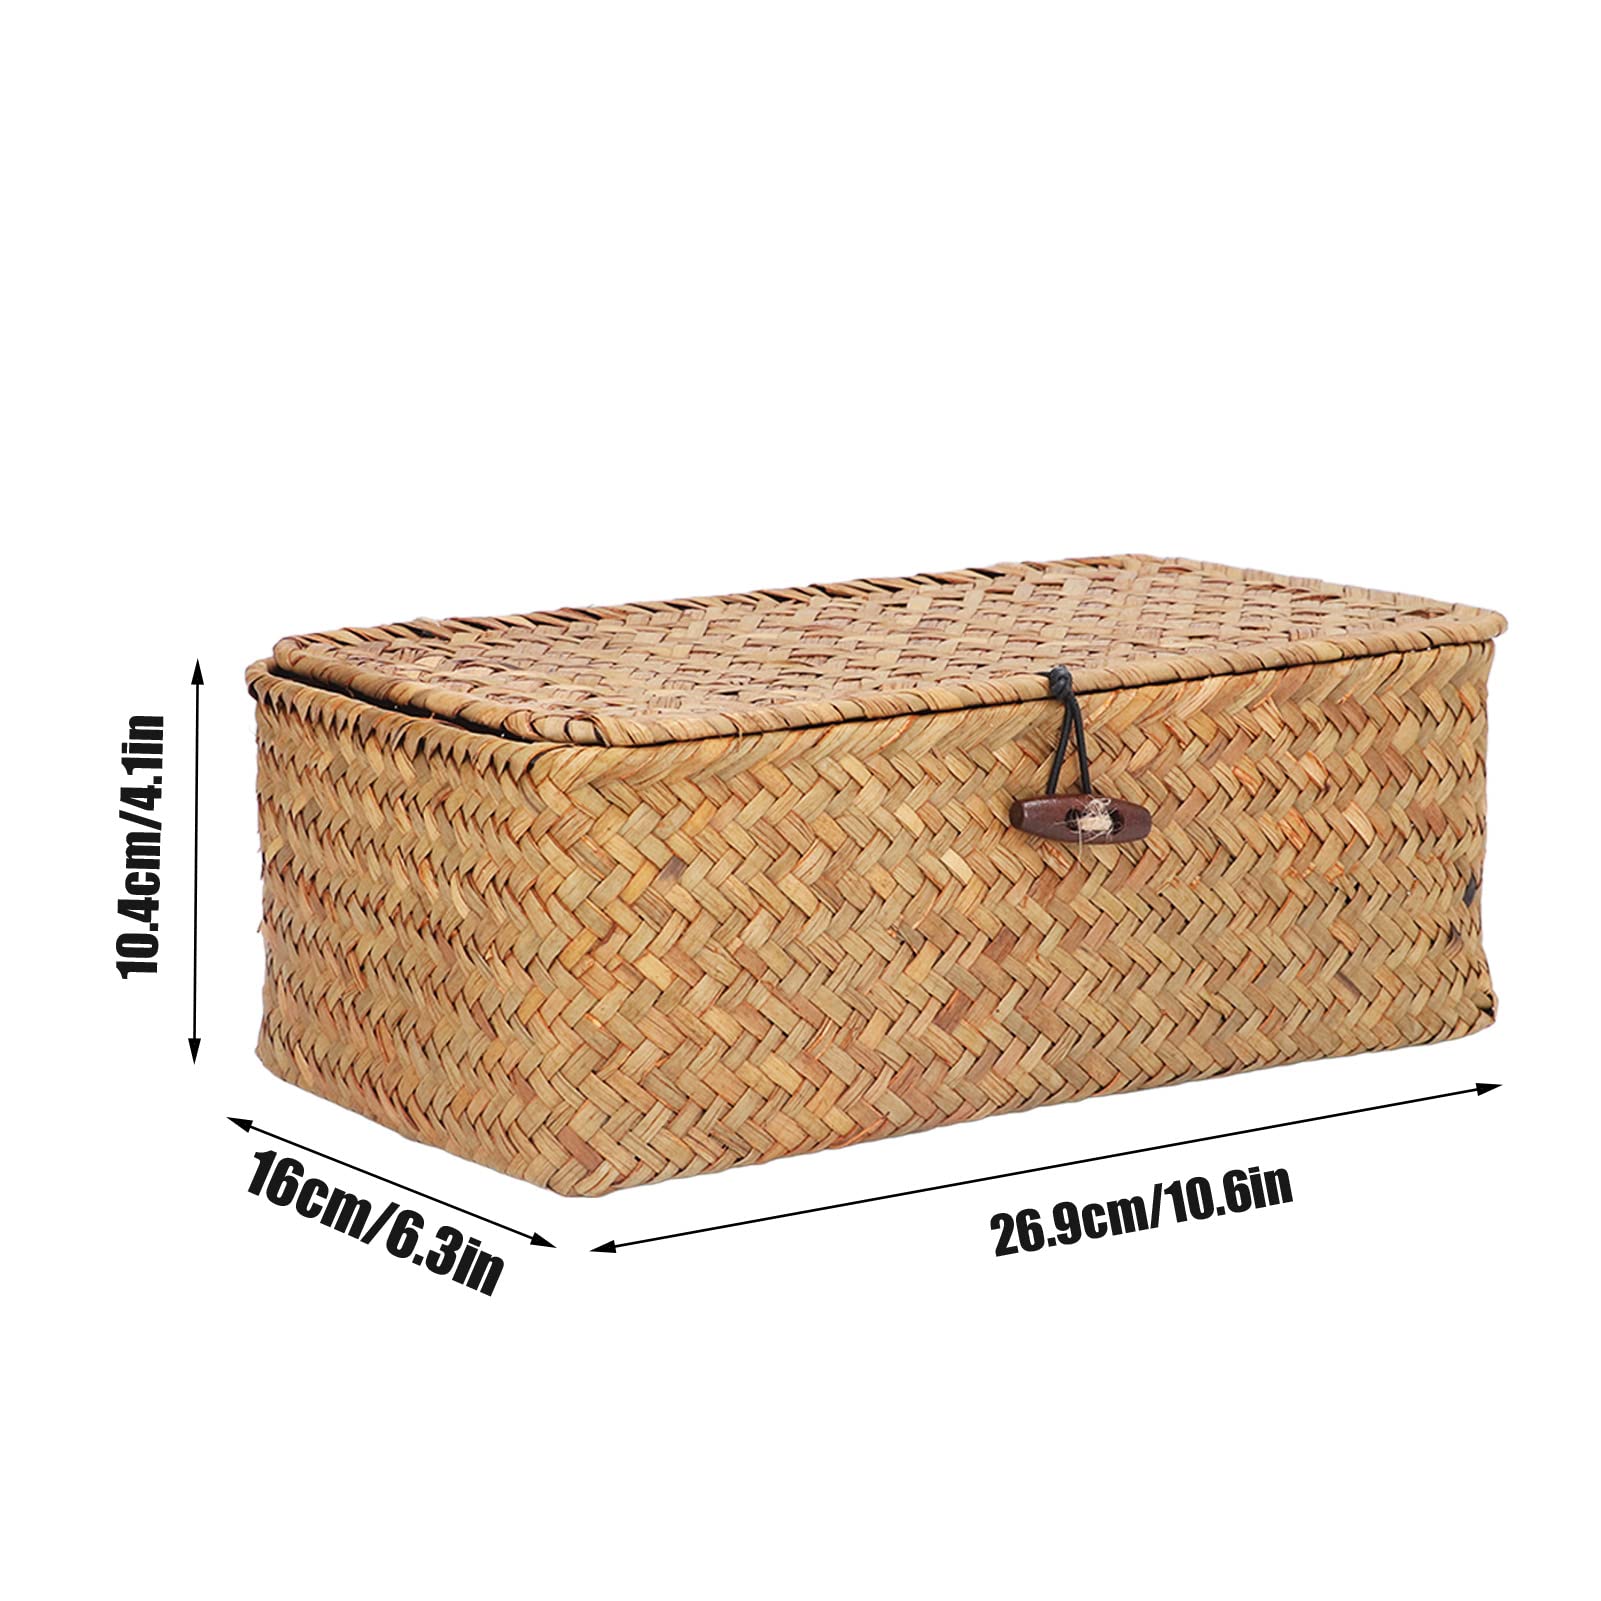 CHICIRIS Seagrass Basket with Lid, Wicker Storage Basket with Lid Hand Woven Rectangular Shelf Organizer Box Organizing Bin for Home Living Room Bedroom (Caramel) (M)